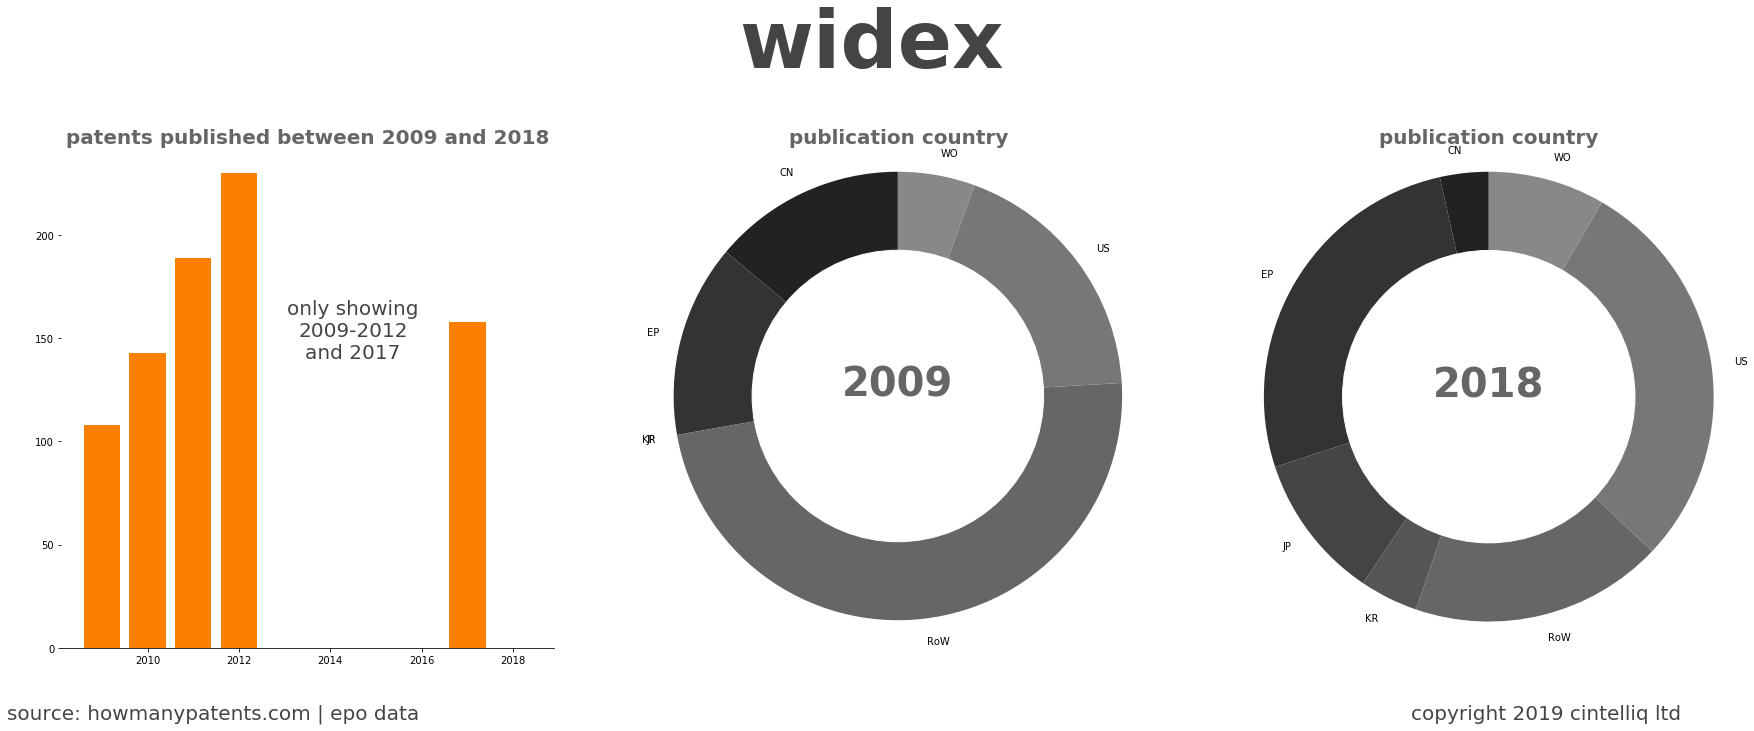 summary of patents for Widex